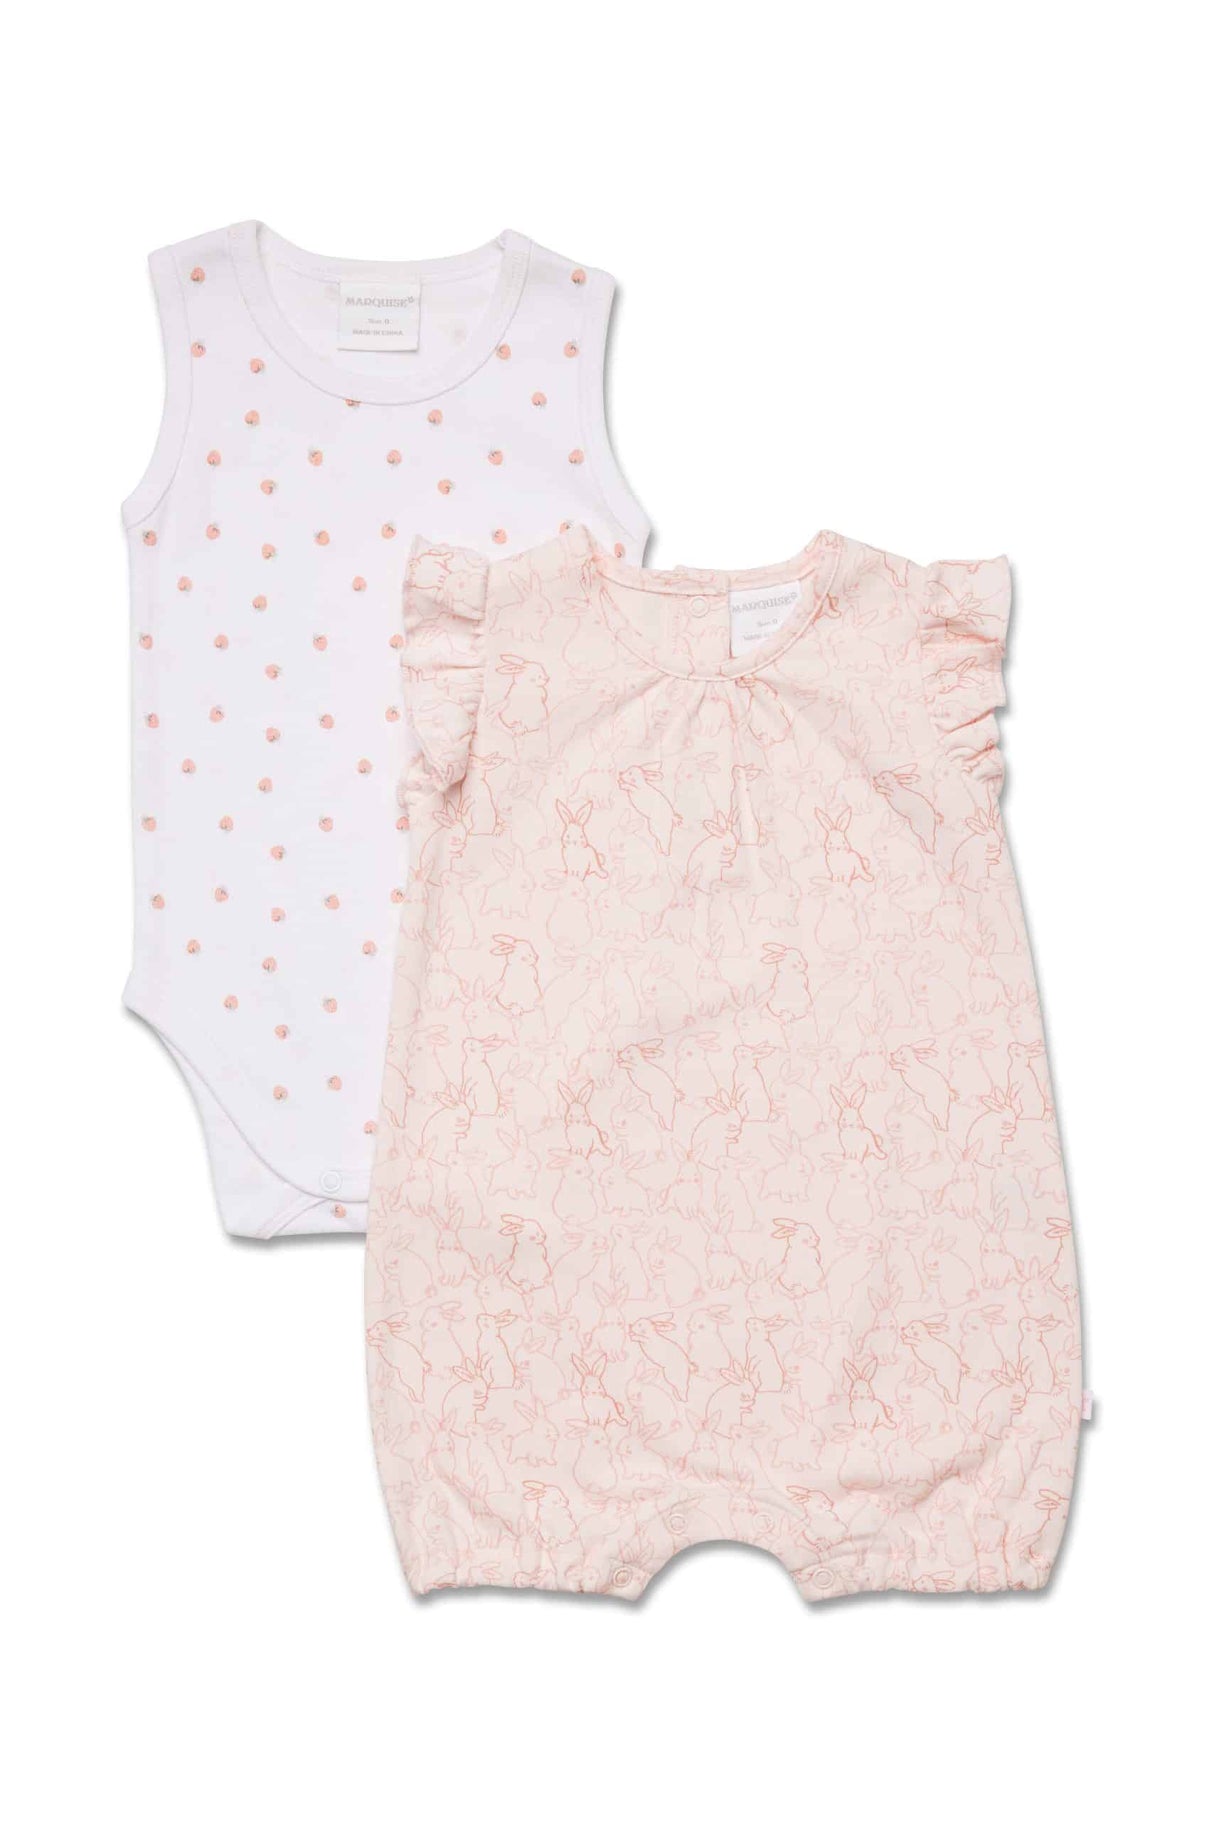 Marquise Bunny Romper and Strawberry Bodysuit 2 Pack